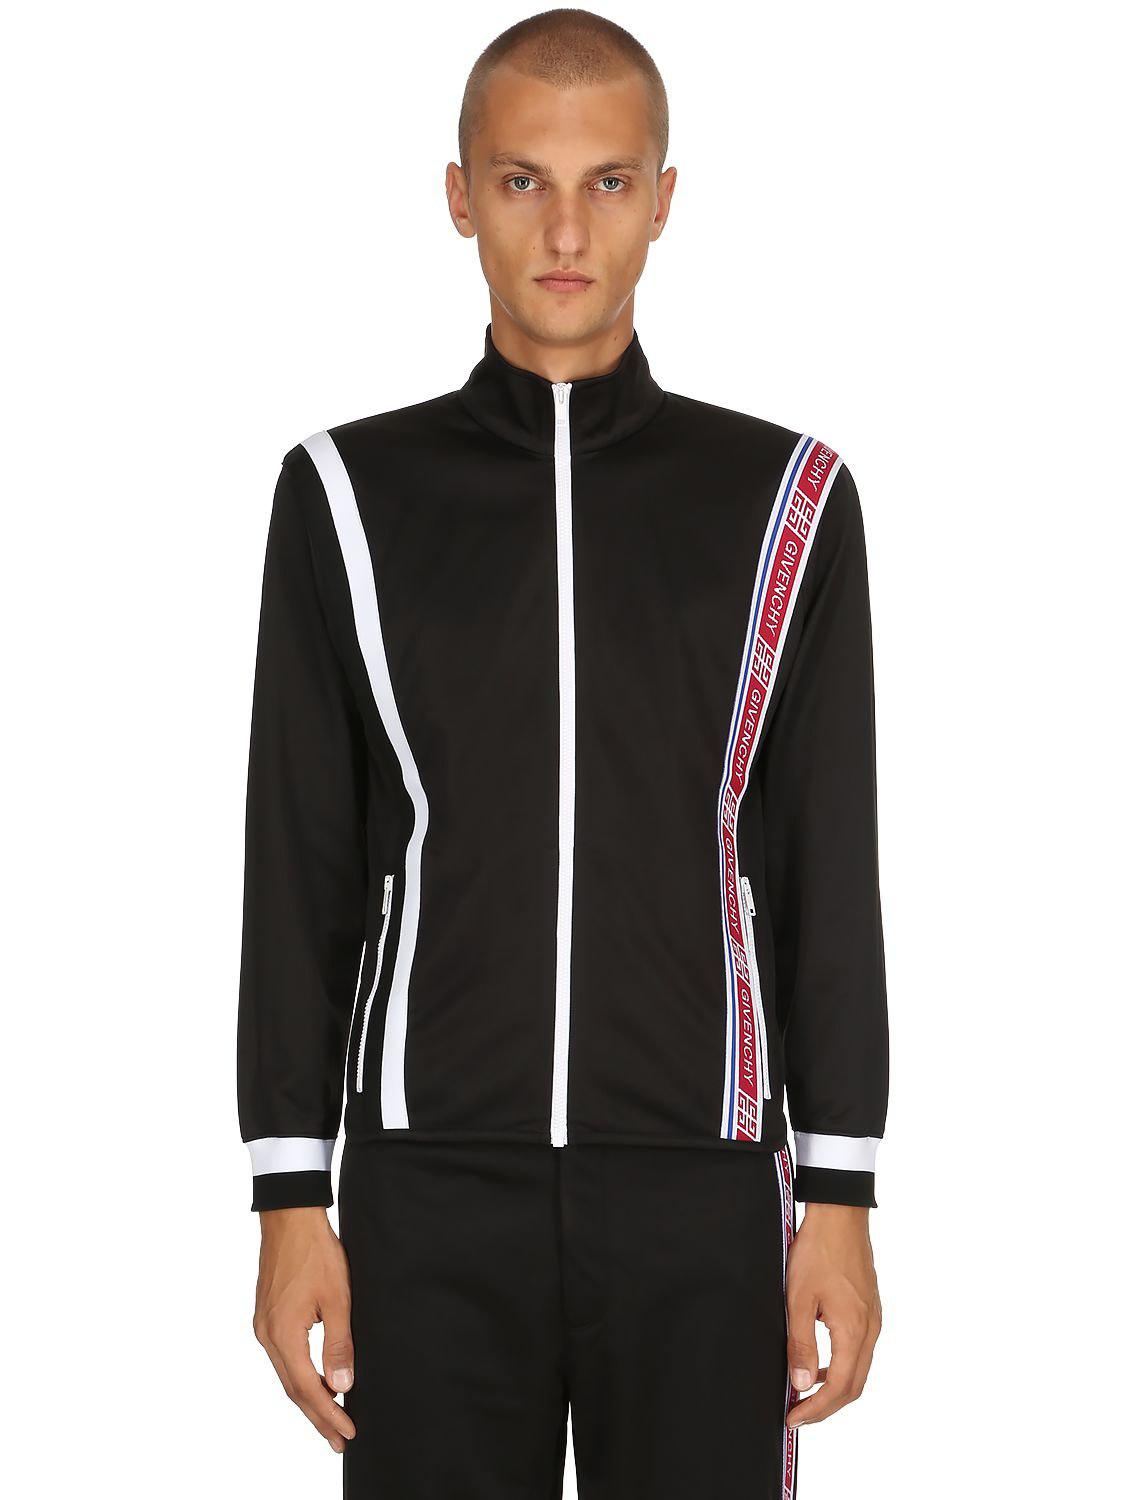 Givenchy Zip-up Jersey Logo Sweat Jacket in Black for Men - Lyst